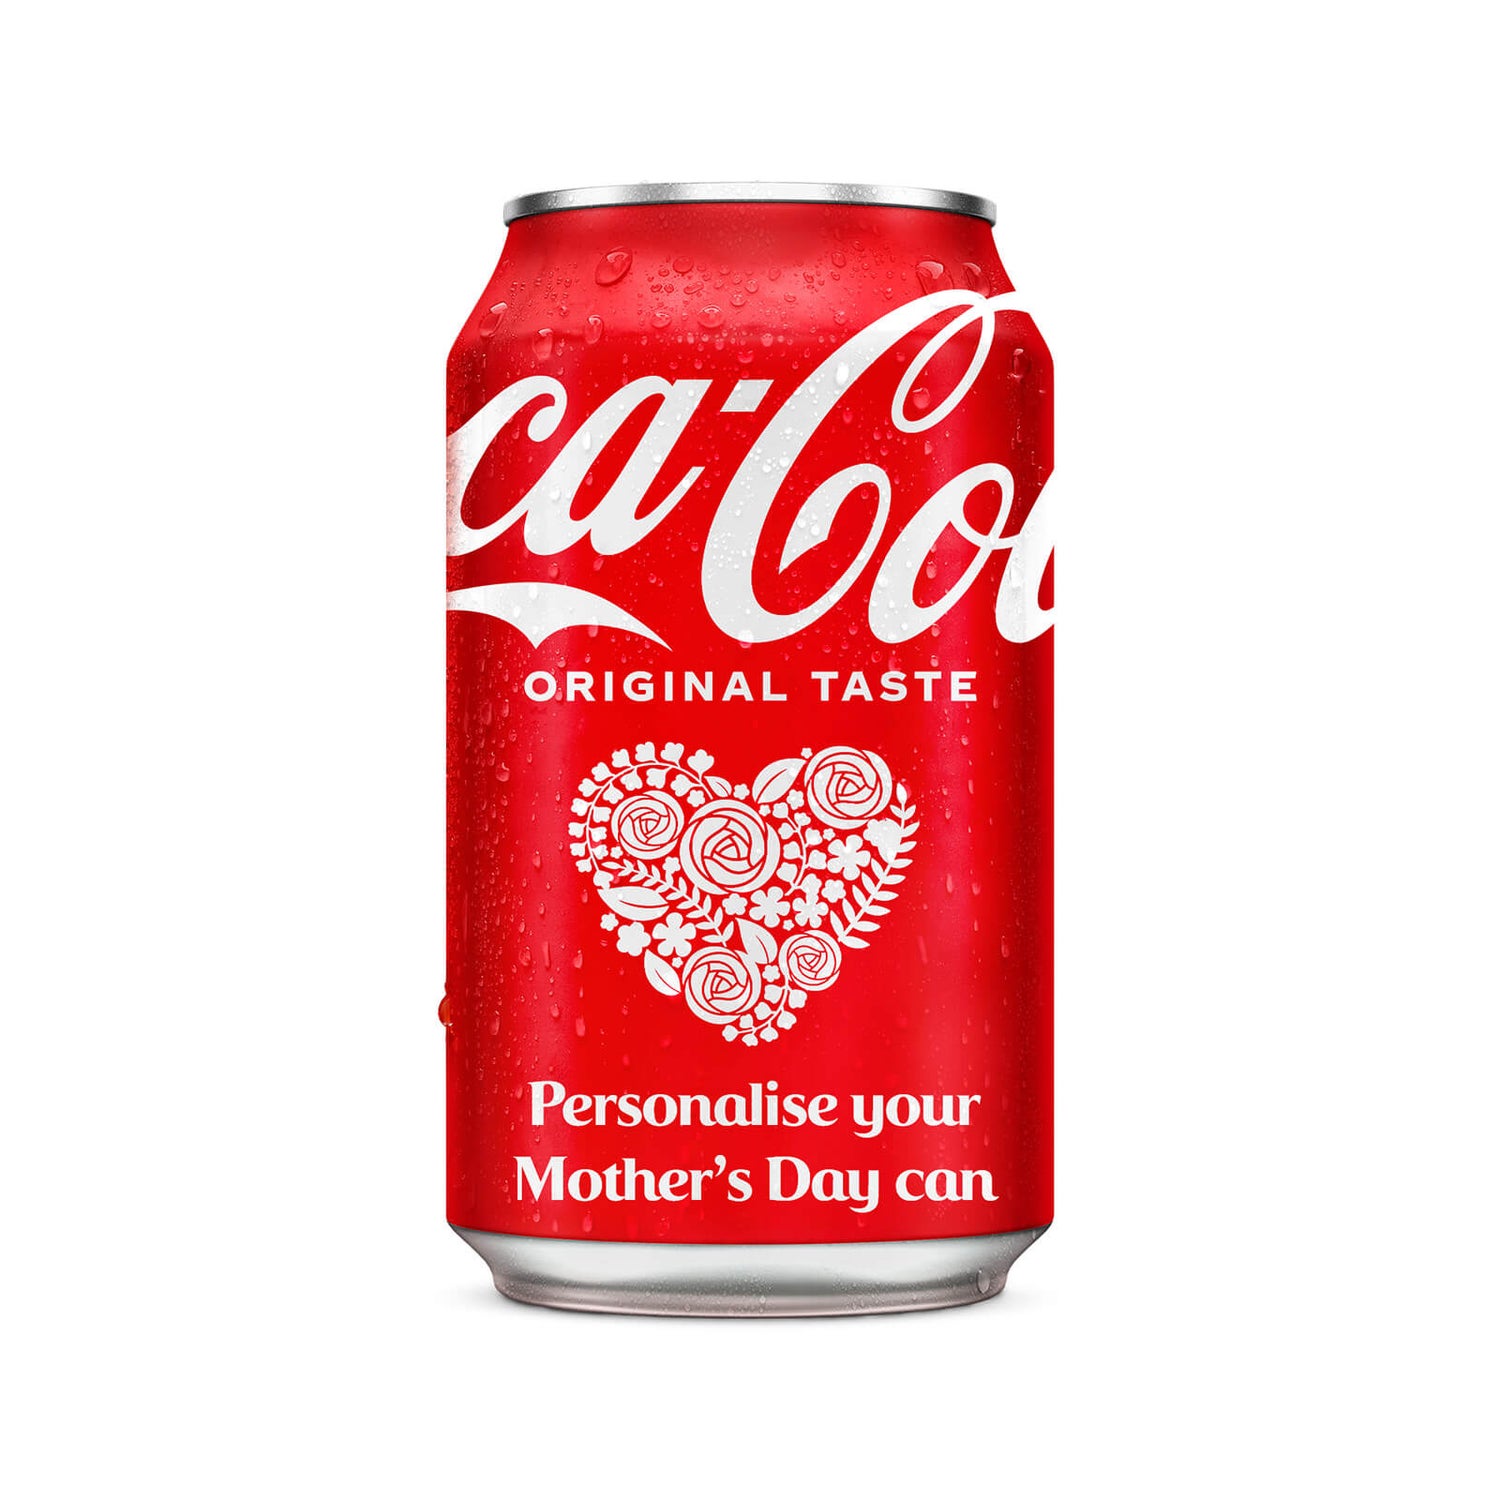 Coca-Cola Original Taste 330ml - Personalised Can - Mother's Day